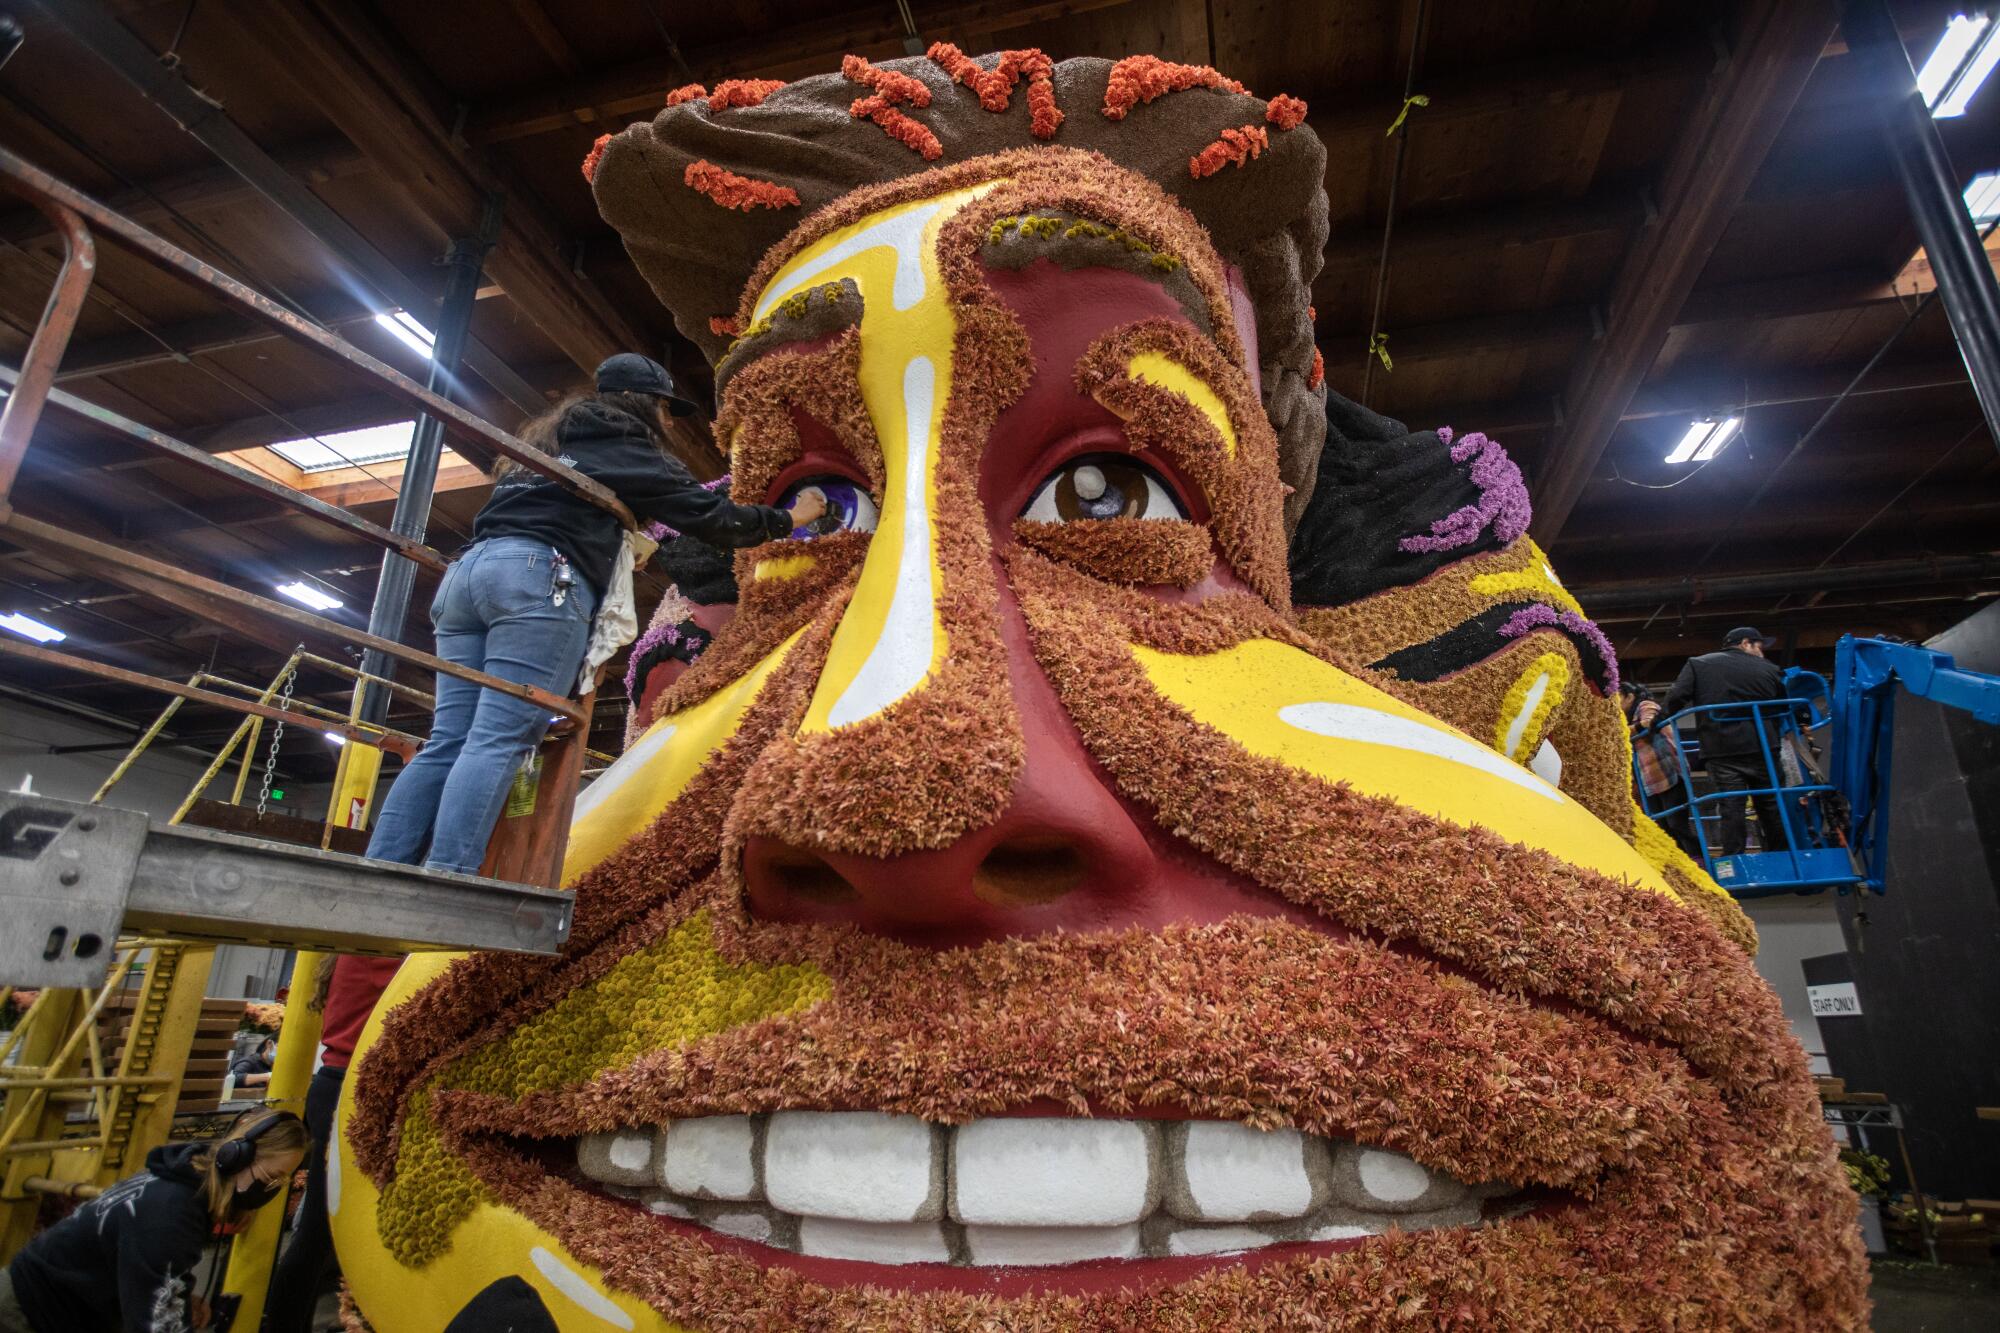 Briana Navarro works on the Snapchat "Wait'll You See This" float inside the Rosemont Pavilion on Saturday.